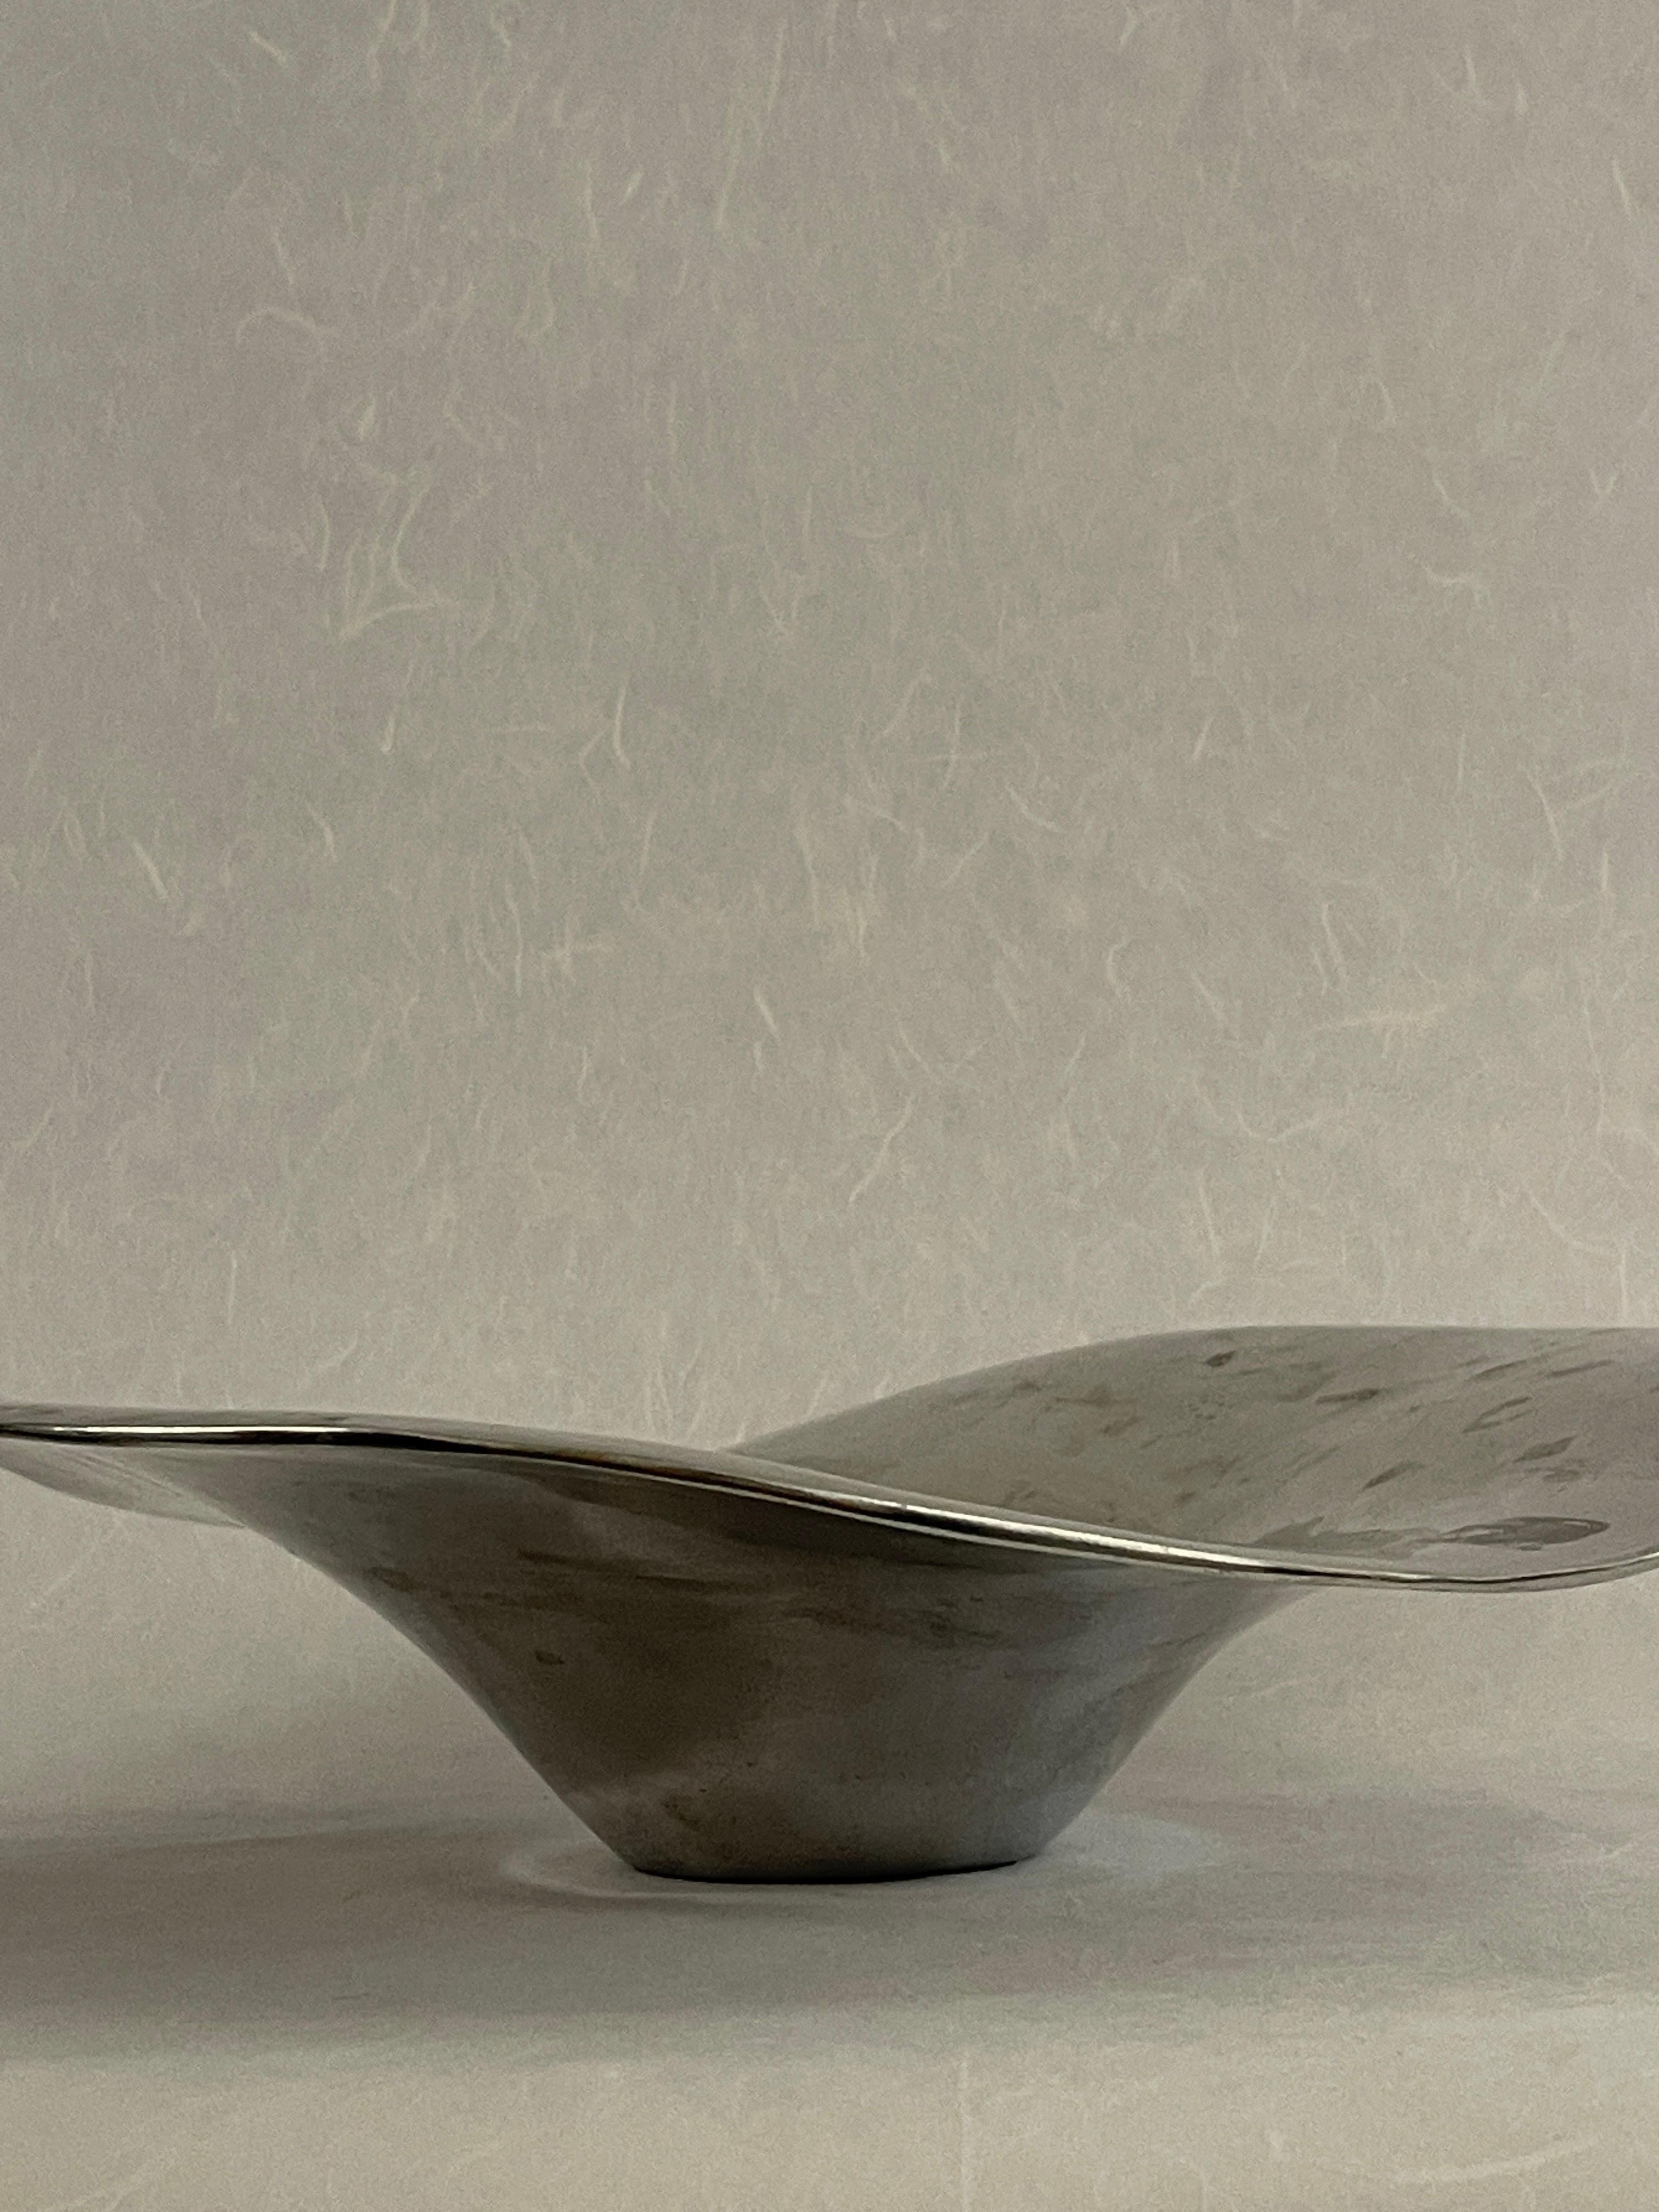 Post-Modern 20th Century Freeform Stainless Catchall Centerpiece Bowl For Sale